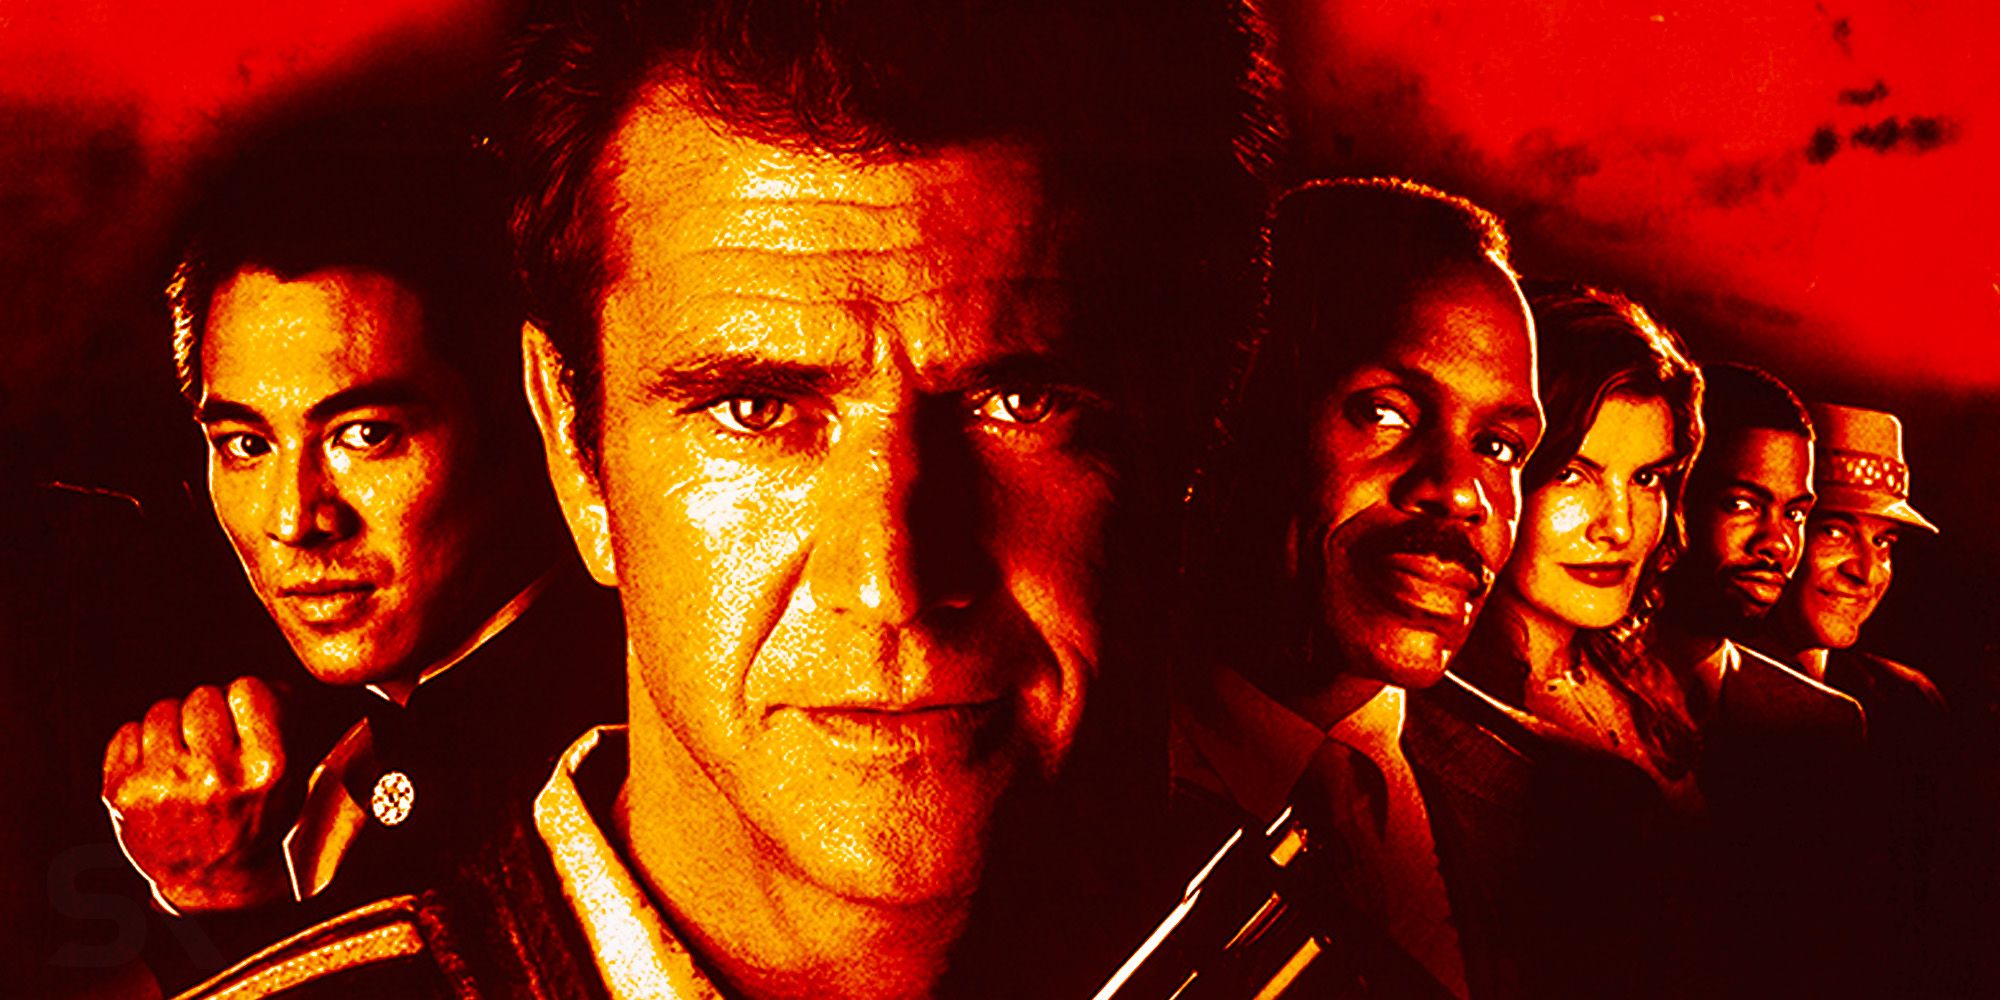 Lethal weapon 4 lethal weapon 5